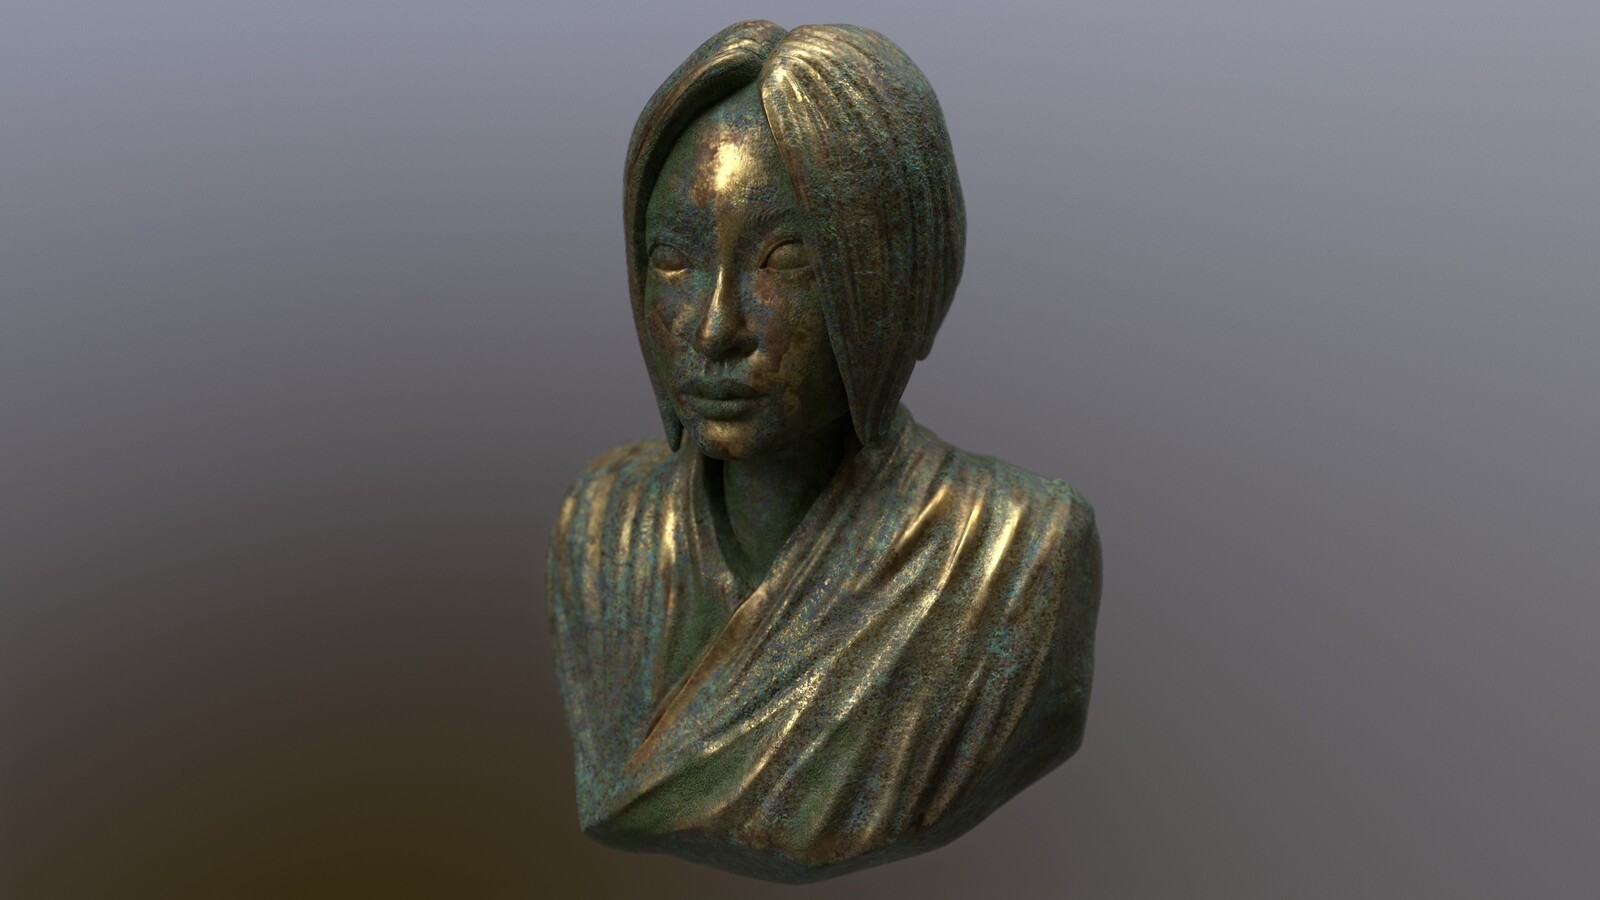 Aya Ueto bust. First experiment with texturing in Marmoset.